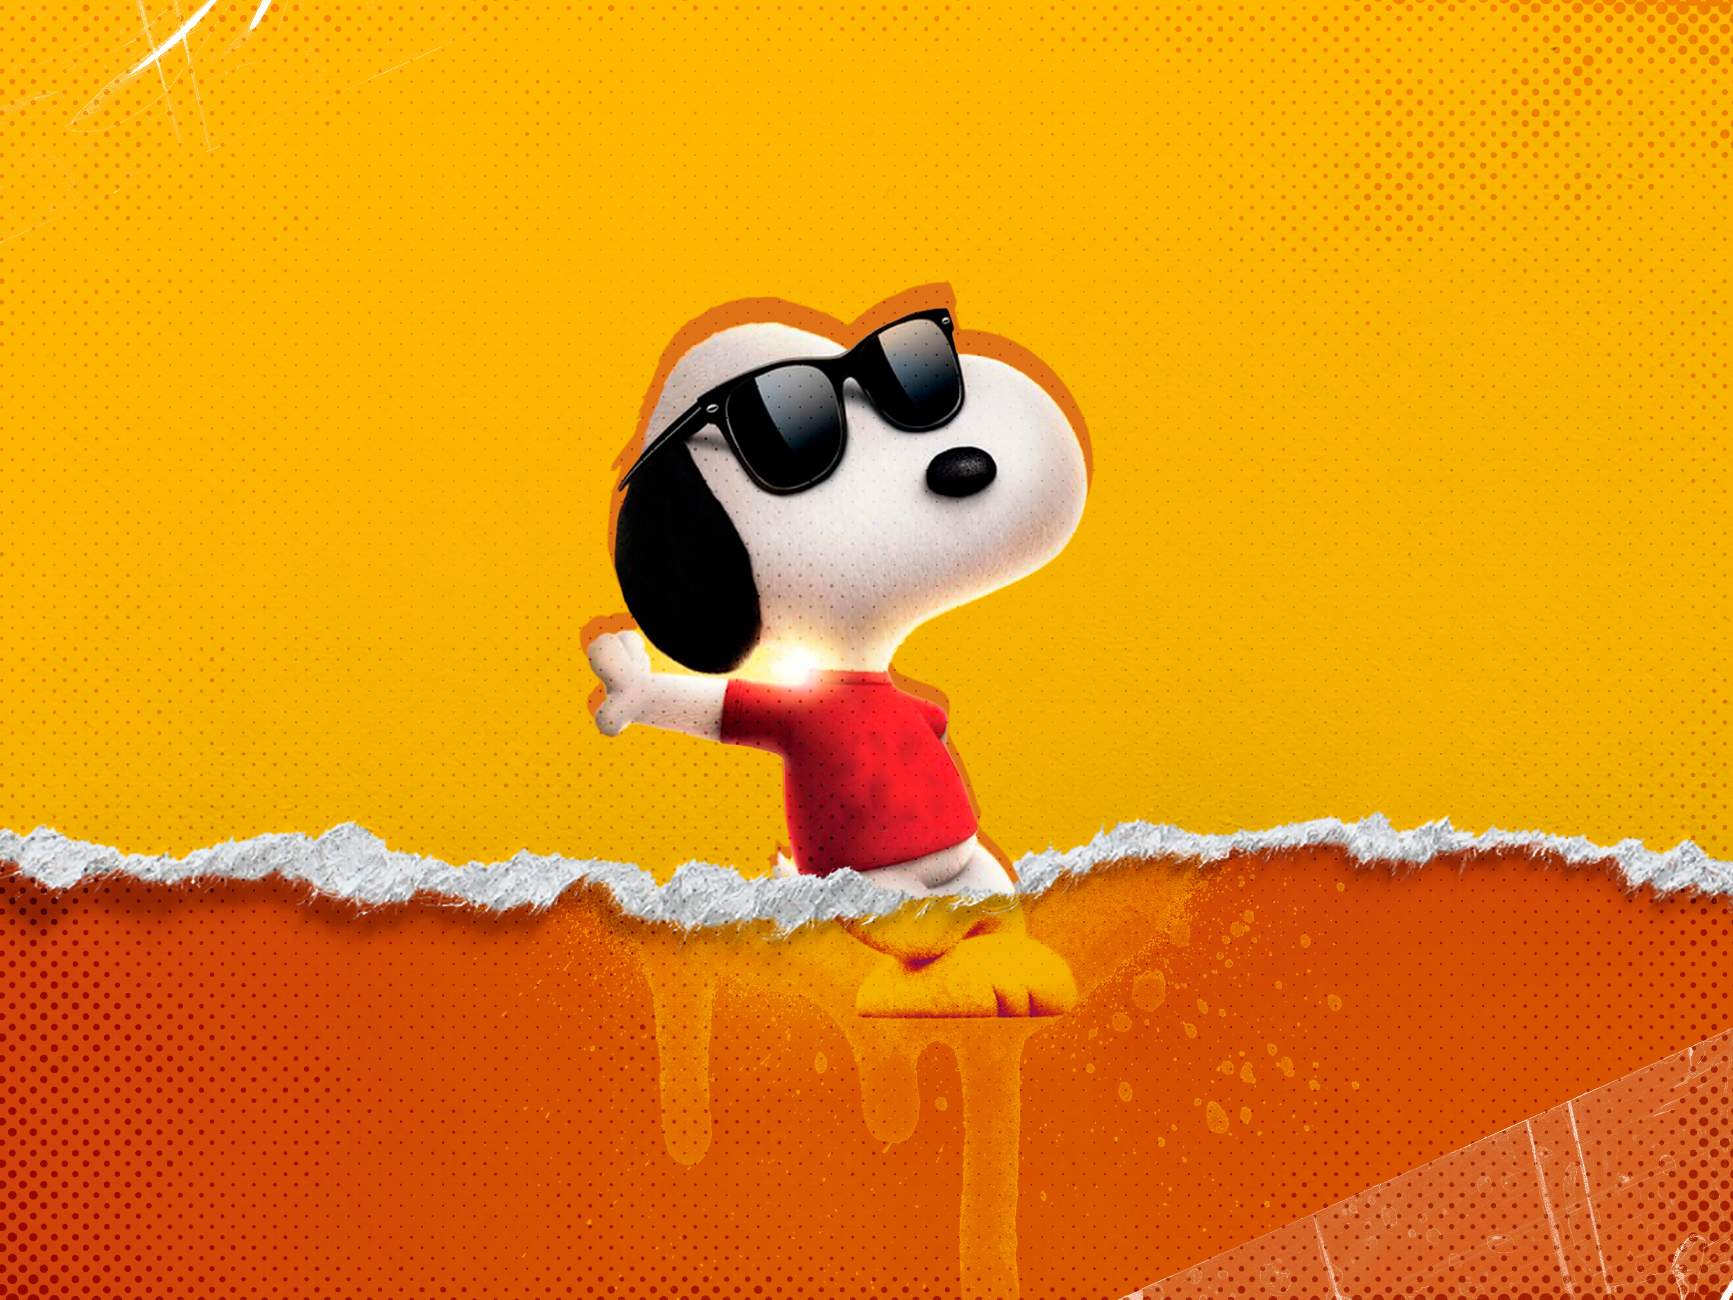 The Peanuts - Snoopy